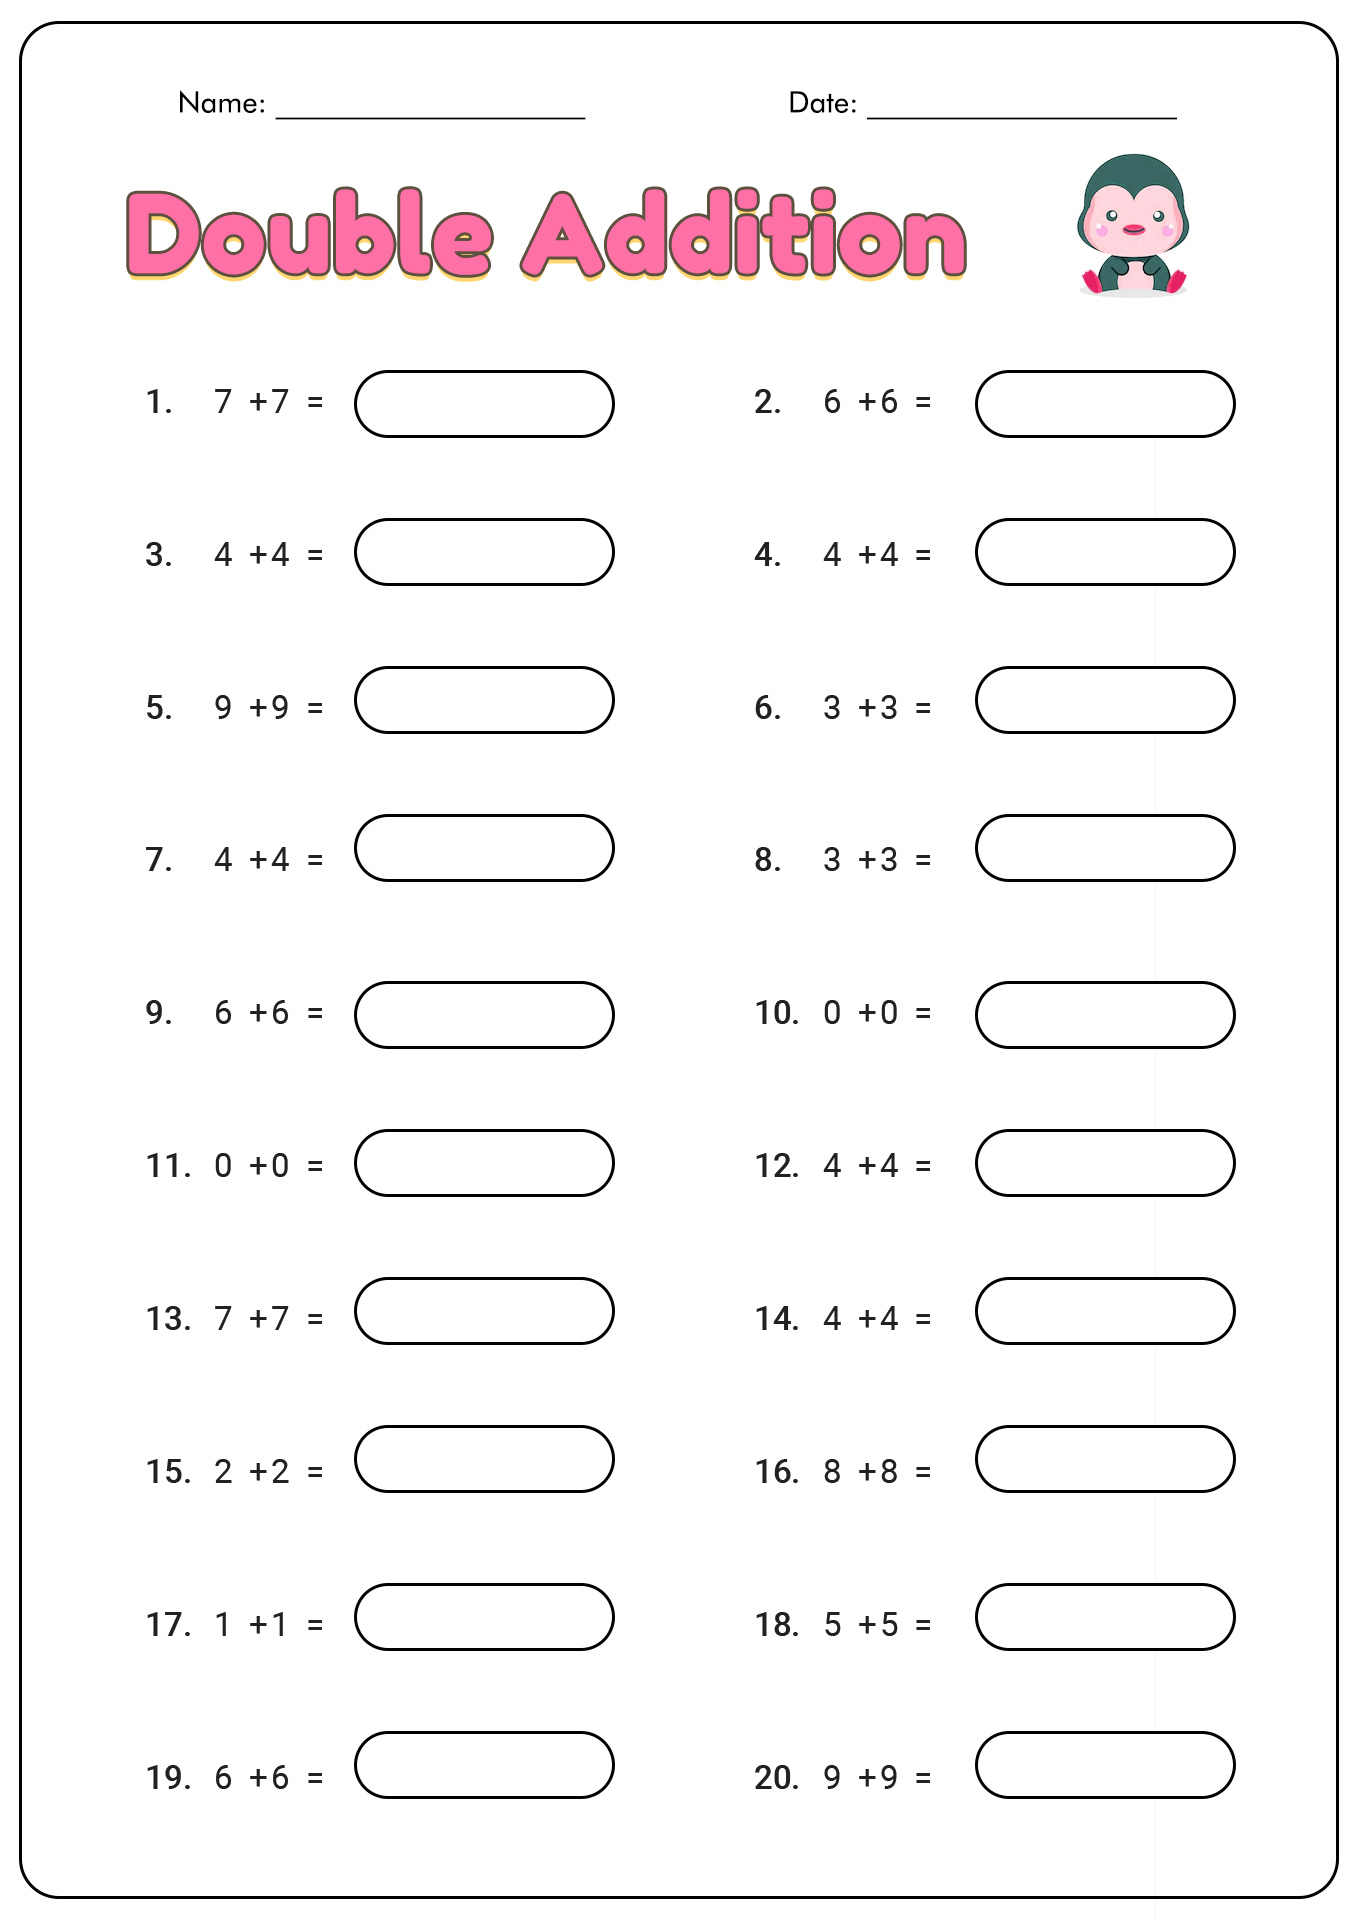 doubles-facts-worksheets